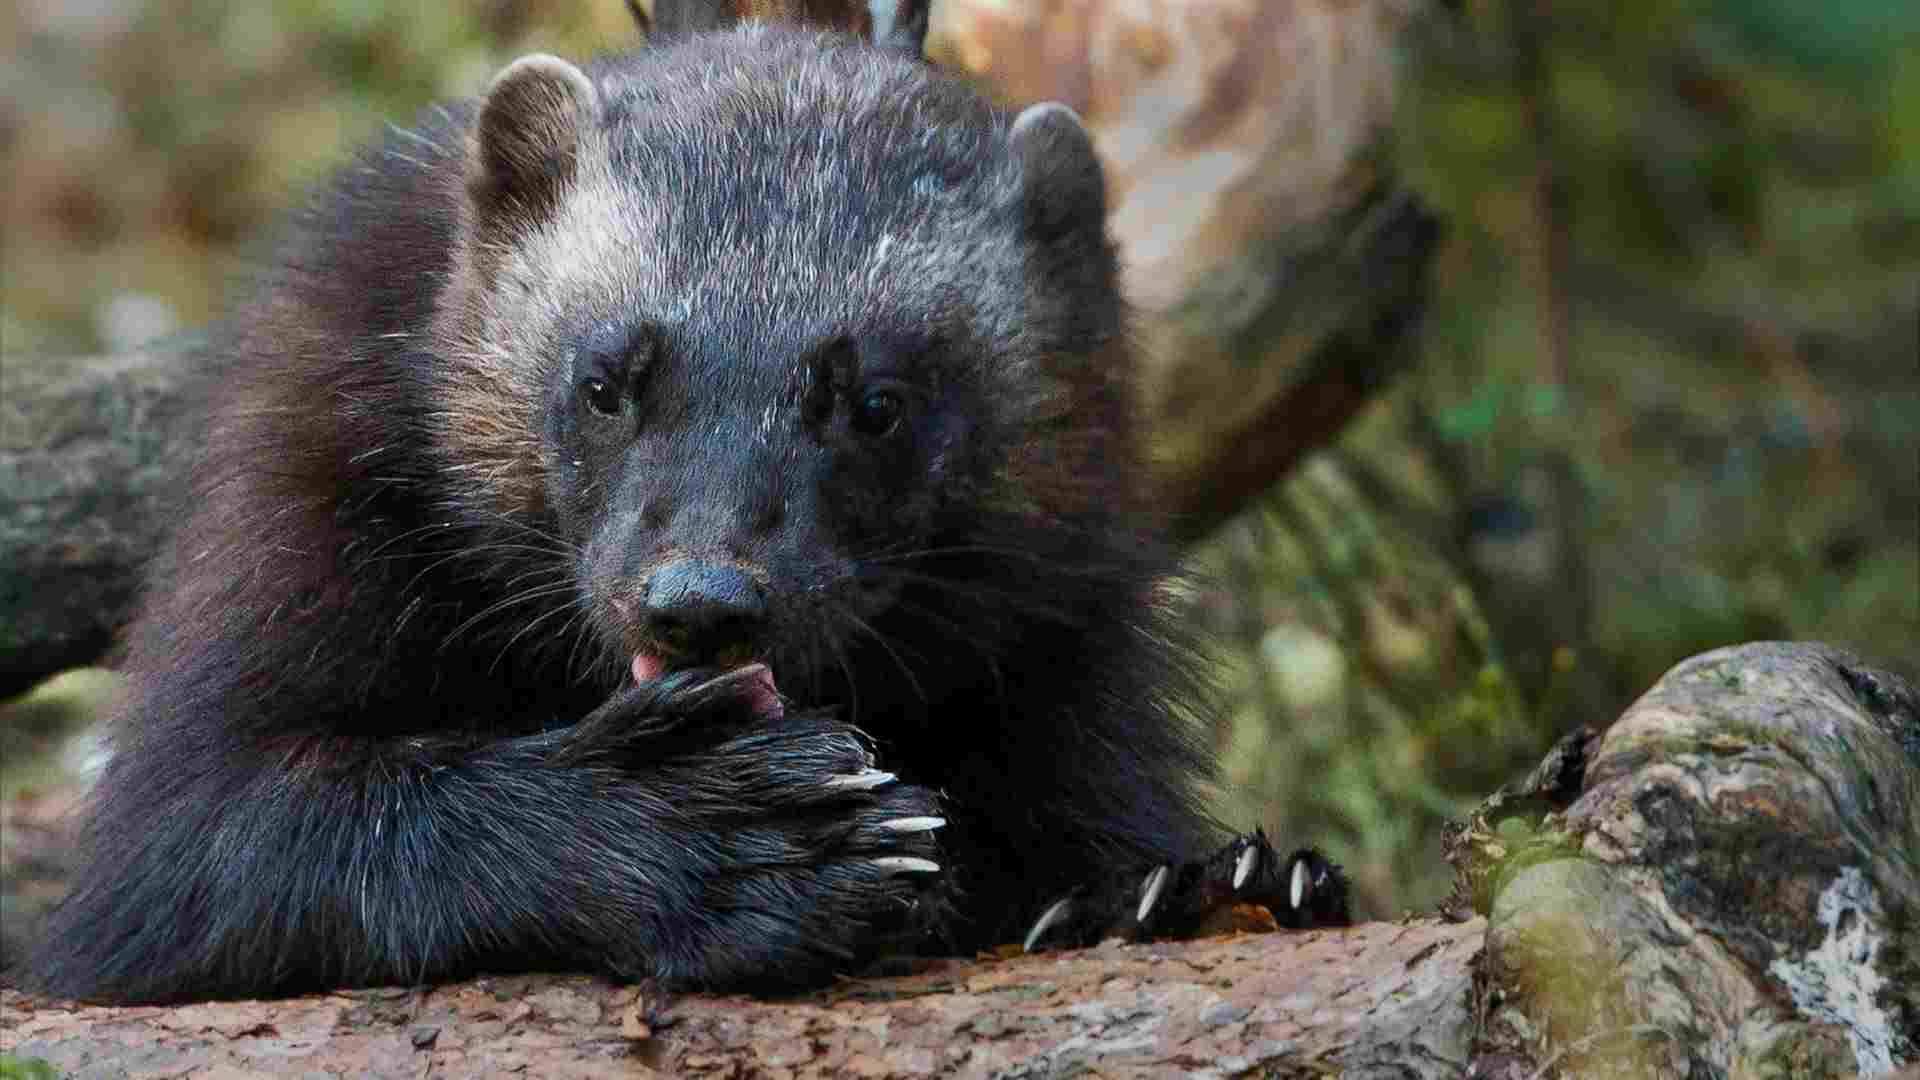 Honey Badger Vs Wolverine: Taxonomy Reveals the Relationship and Disparity Between Wolverines and Honey Badgers (Credit: NTNU, Faculty of Natural Sciences 2015 .CC BY 2.0.)